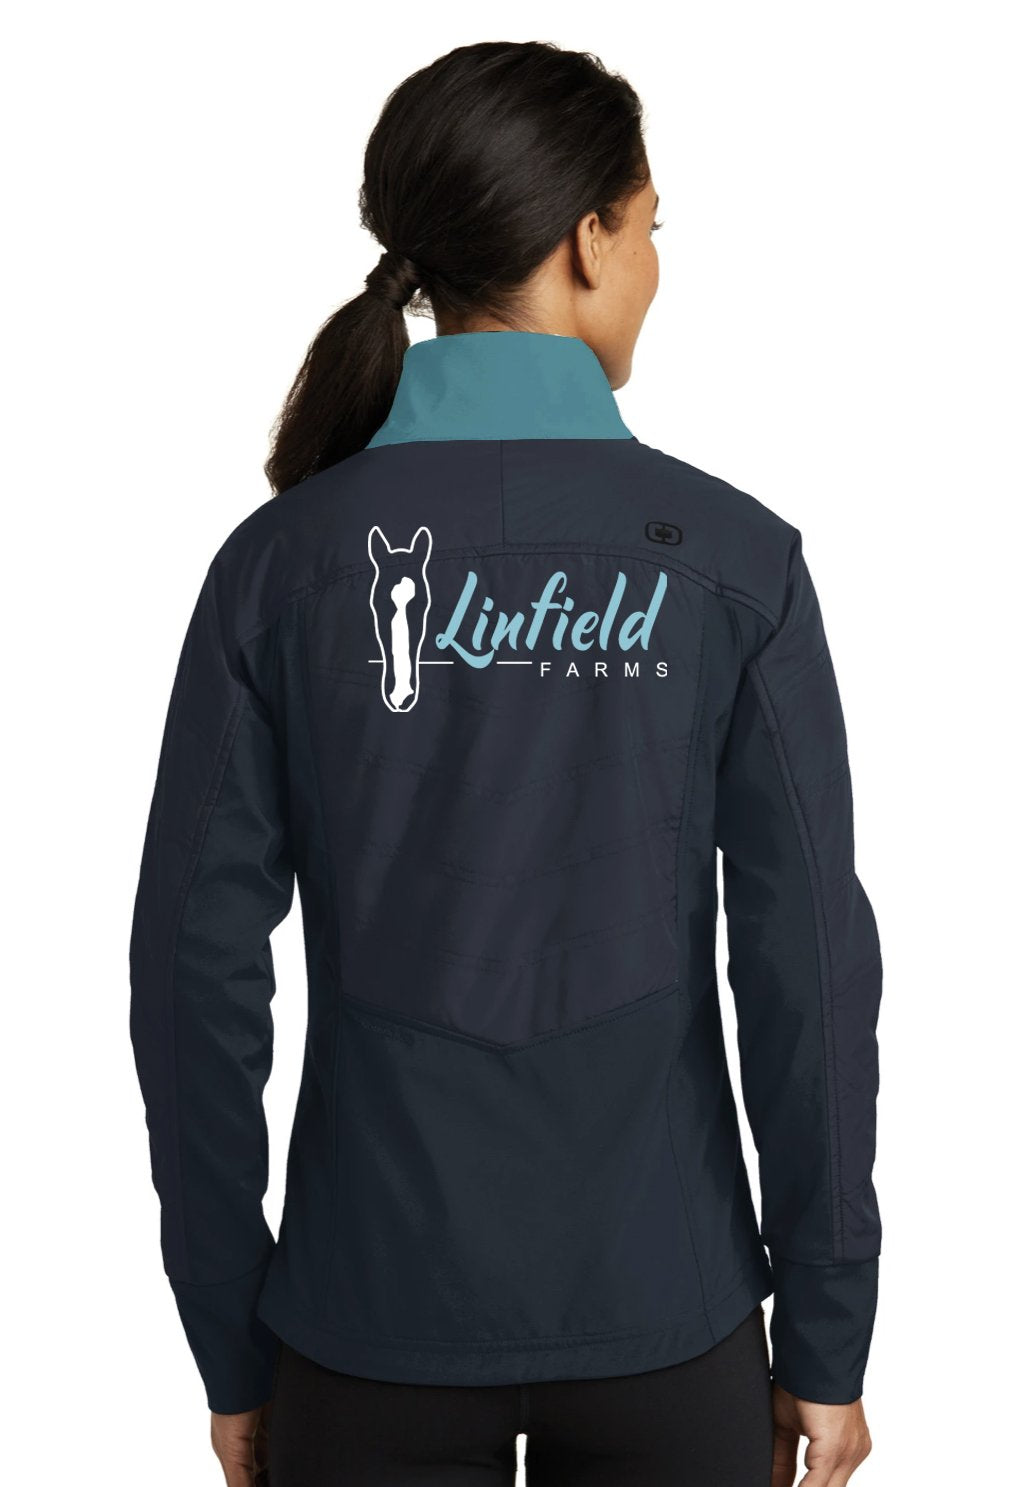 Linfield Farms OGIO® Ladies Brink Soft Shell